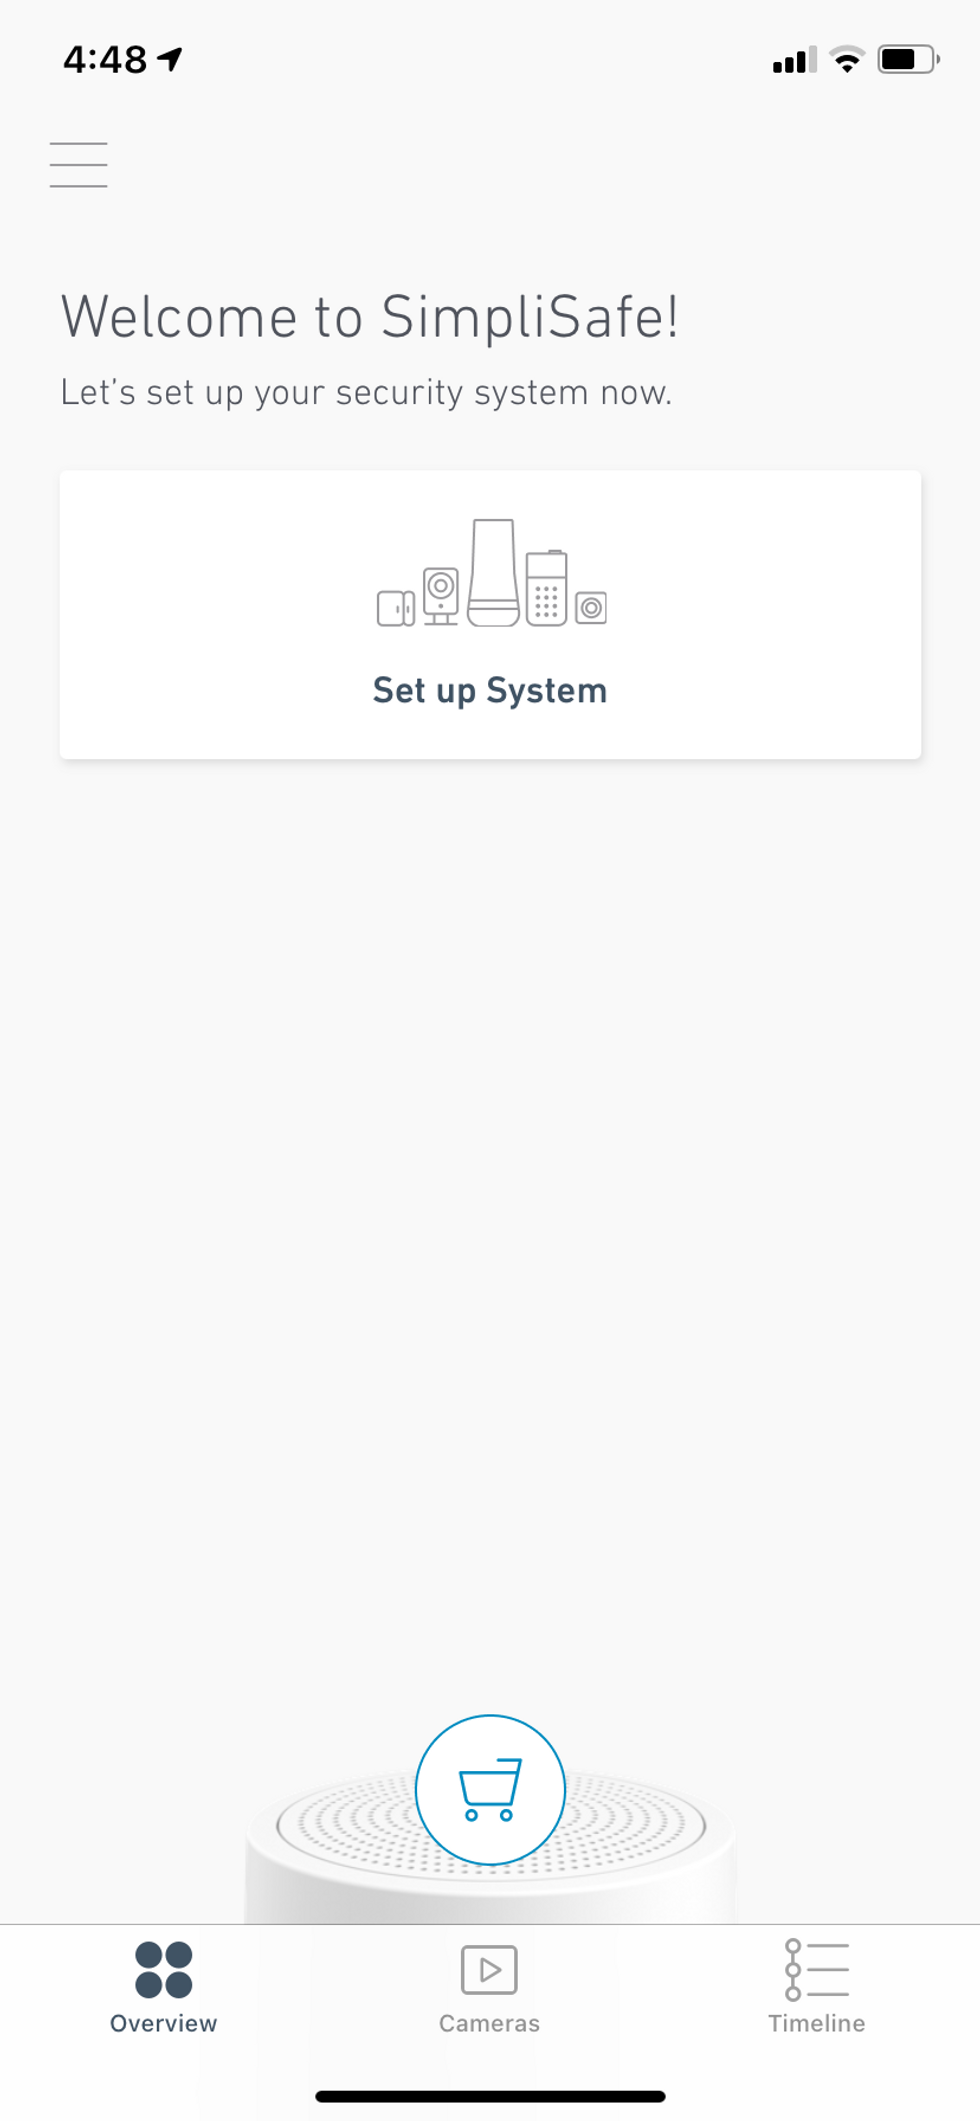 SimpliSafe app screen for setting up your system.